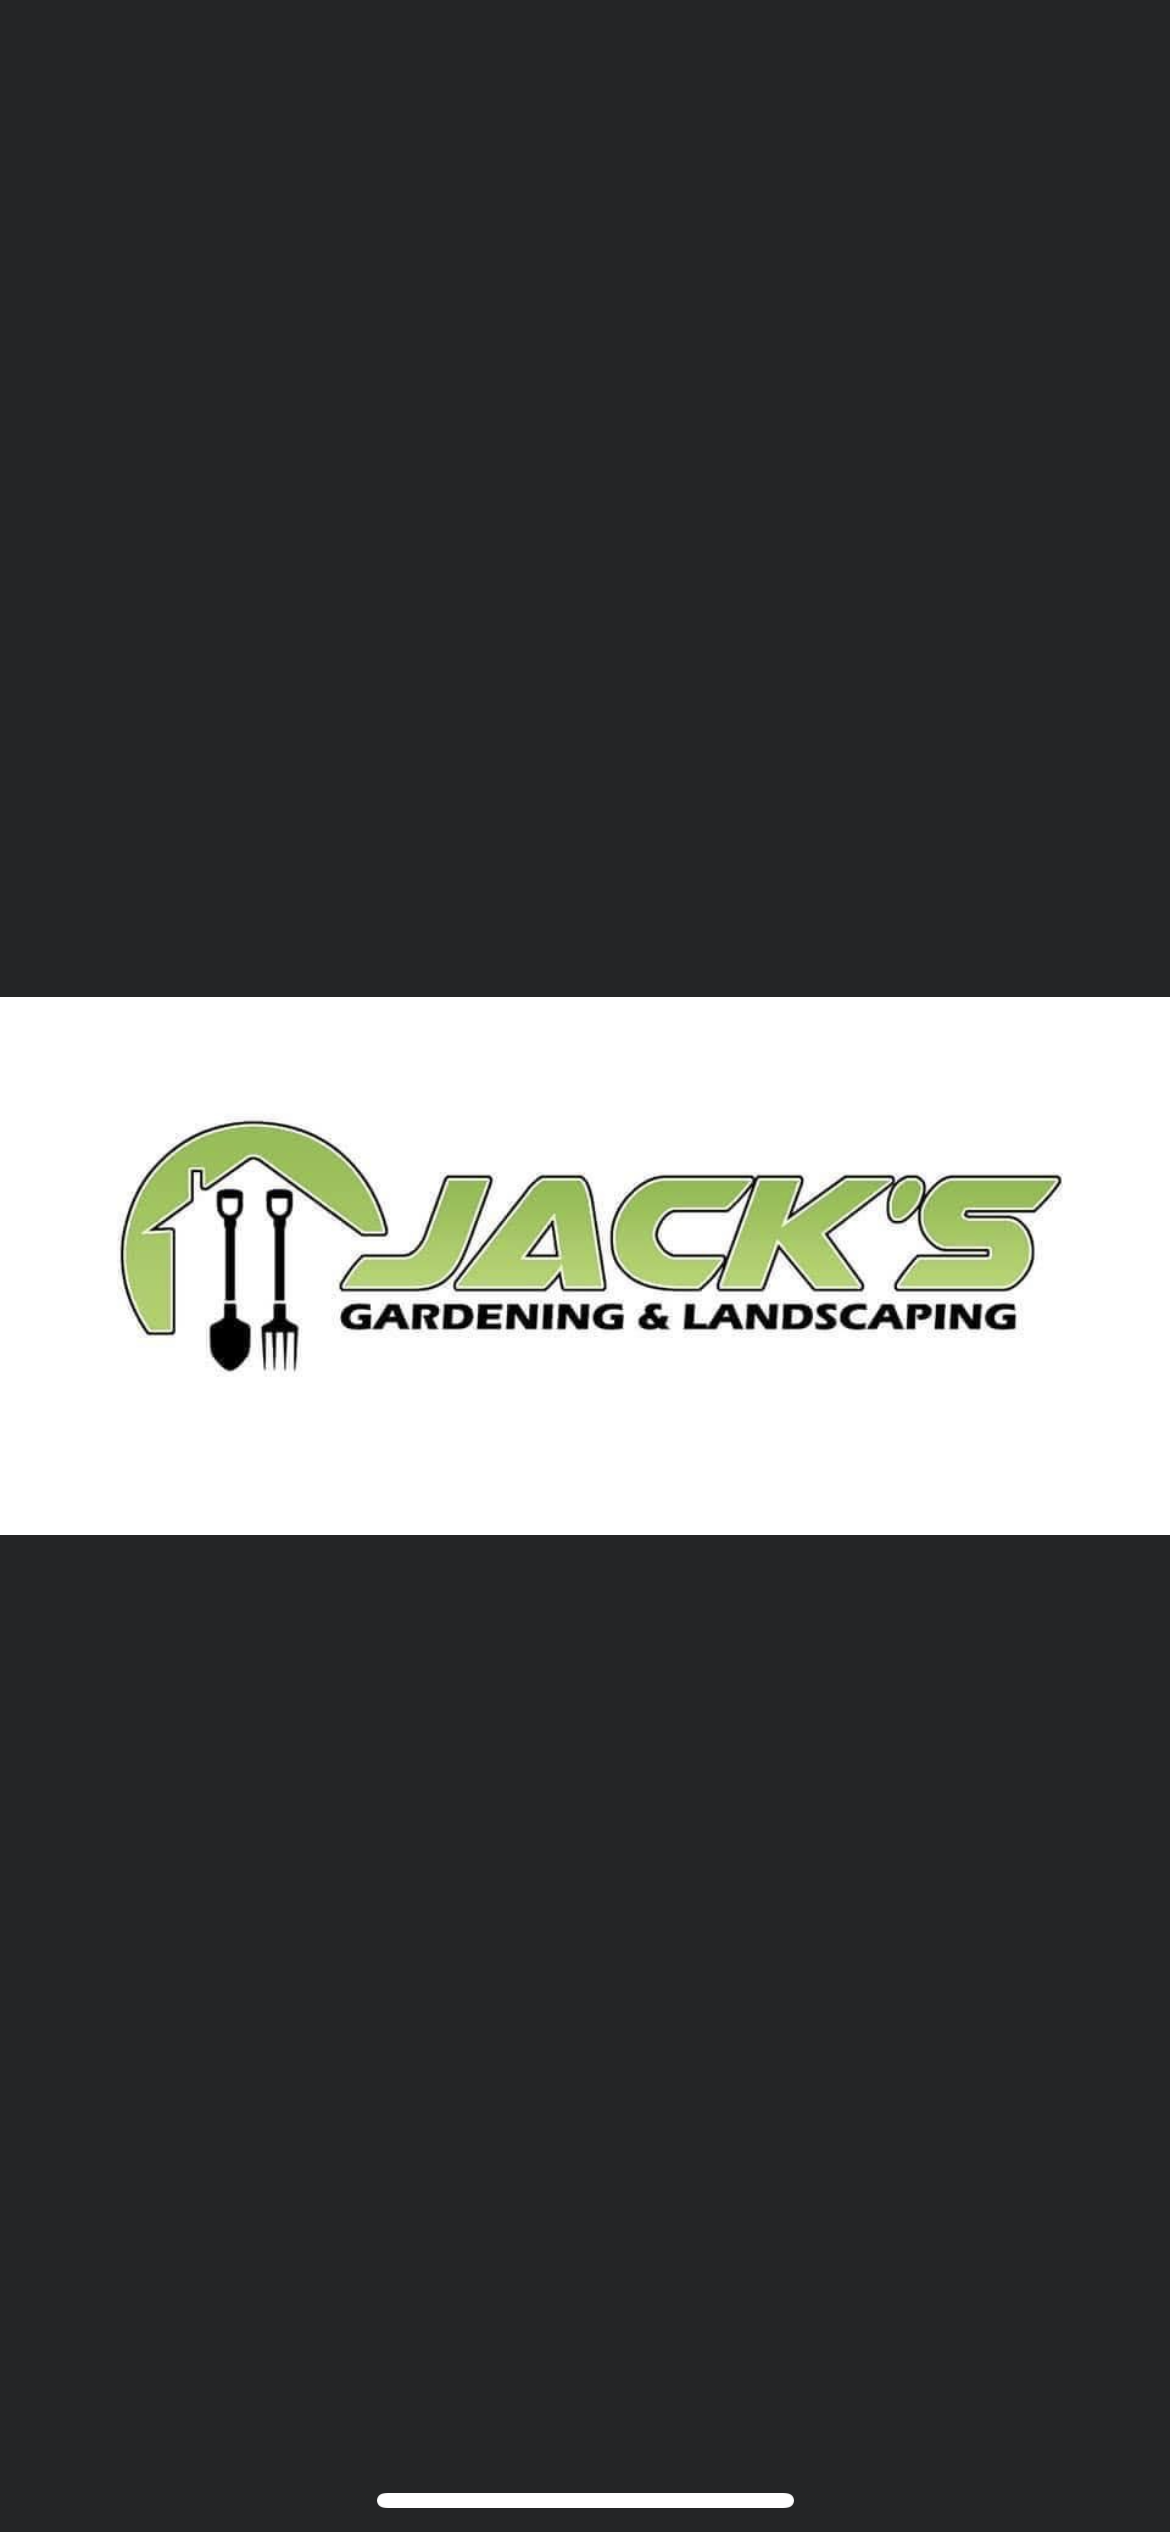 Jack's Gardening and Landscaping